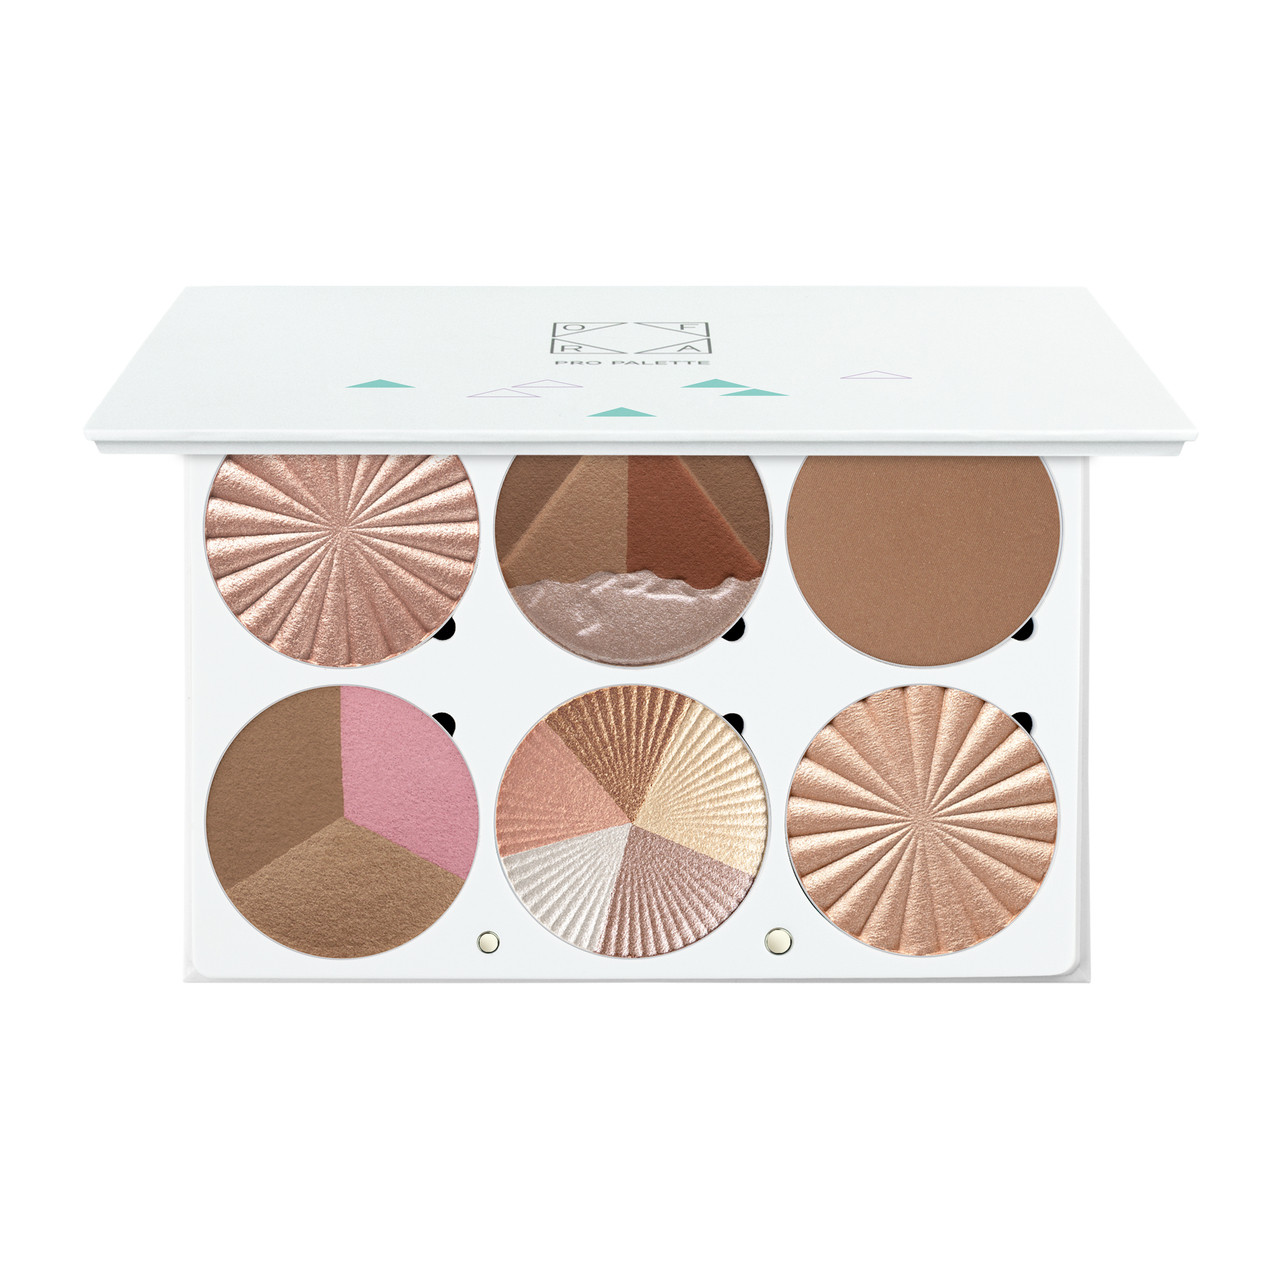 On The Glow Professional Makeup Palette OFRA Cosmetics cruelty free